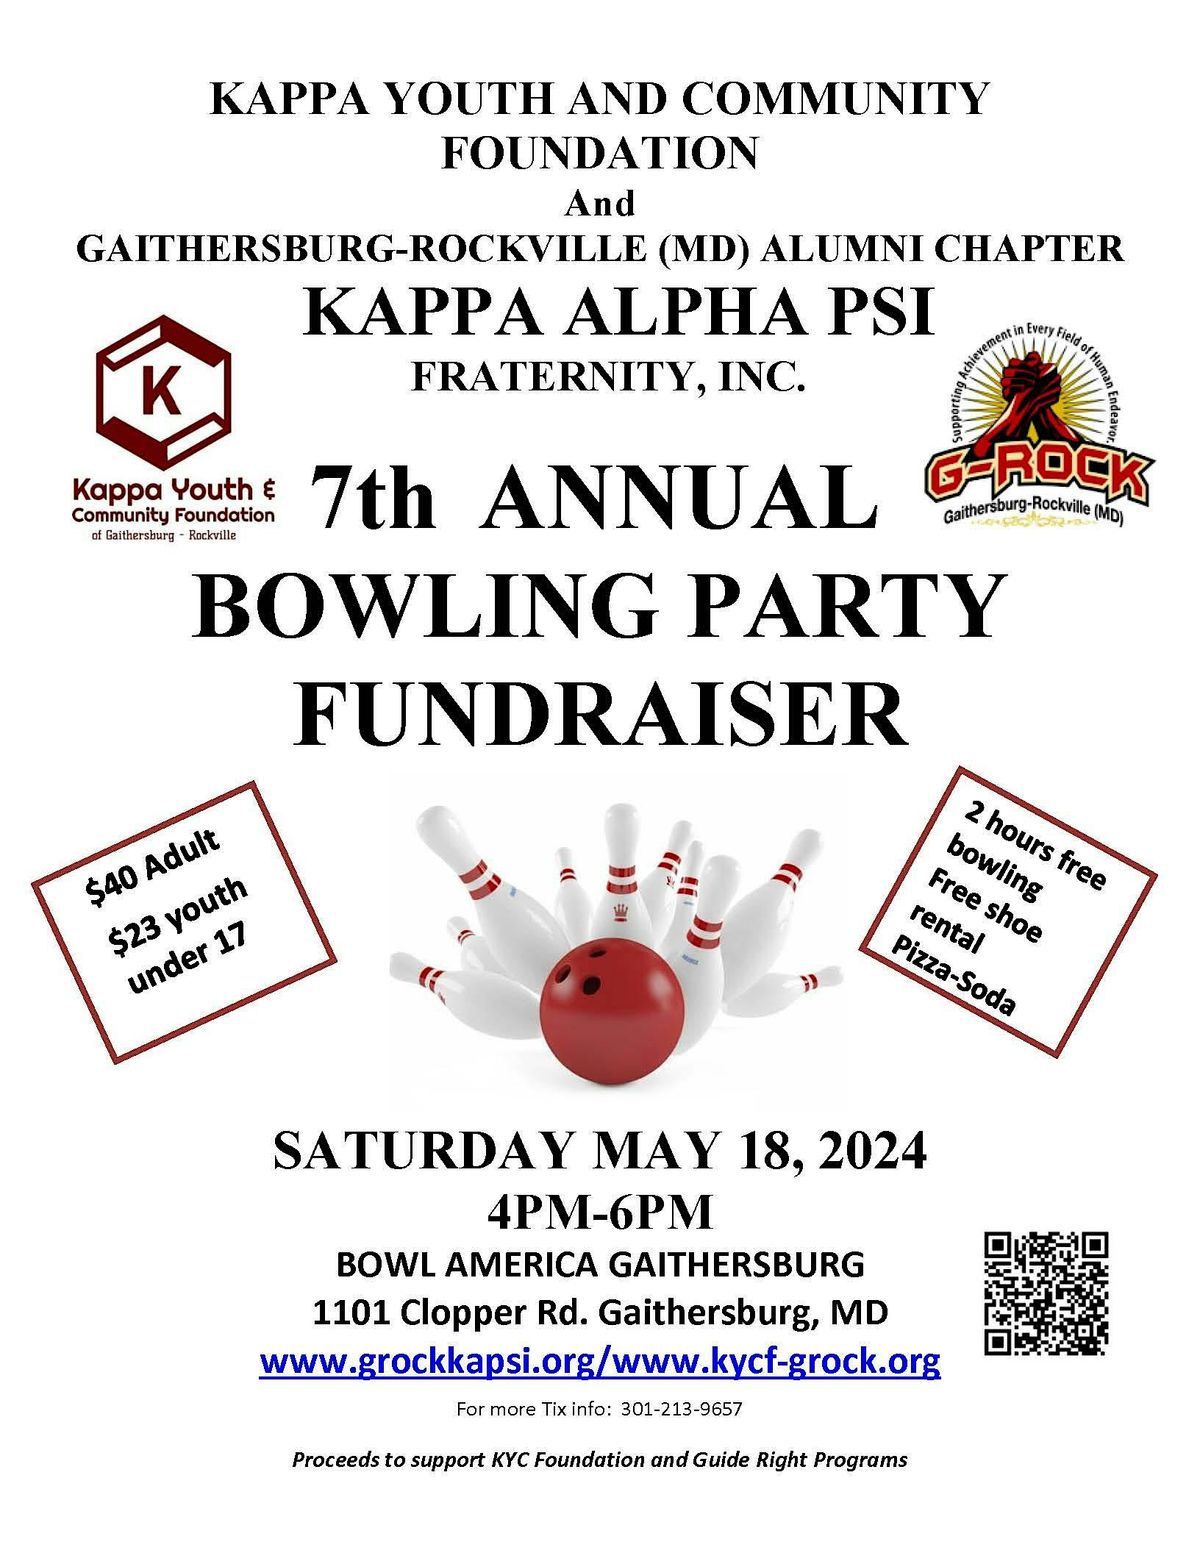 Bowling Party Fundraiser - G-Rock's KYC Foundation of Kappa Alpha Psi